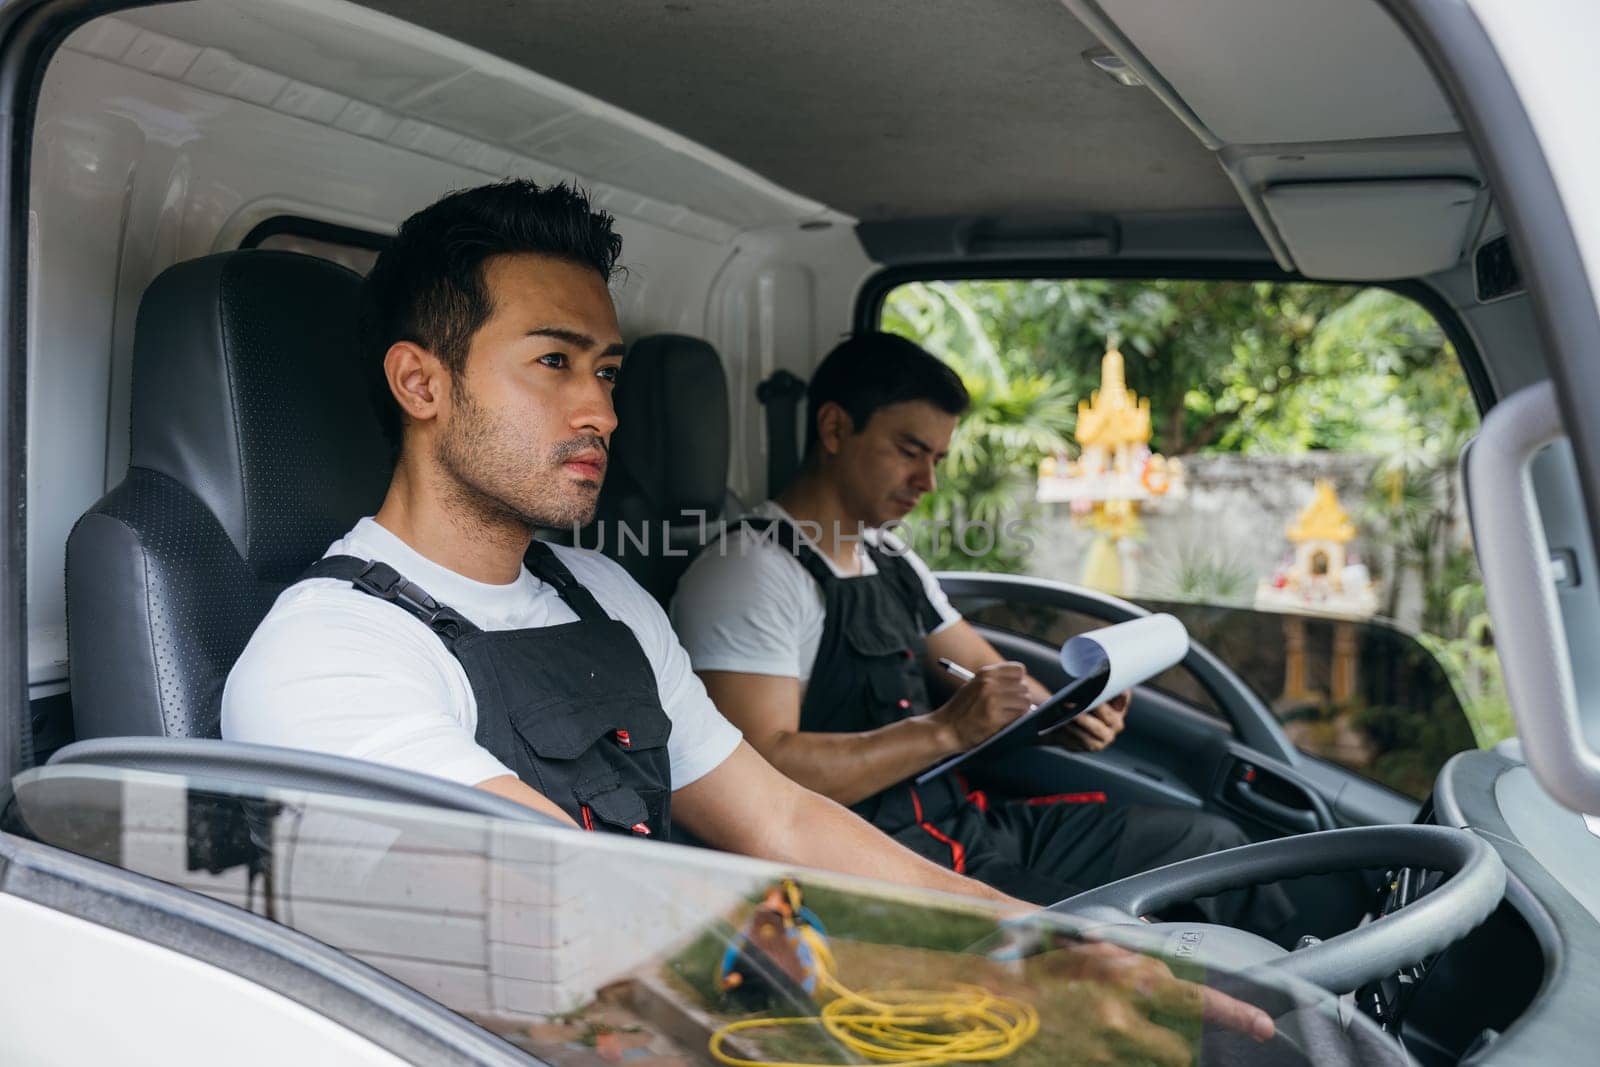 Transporting furniture, Mover workers driving truck for relocation service. Ethnicity diversity in the team. Smiling men delivering and unloading confidently. House moving service concept. by Sorapop